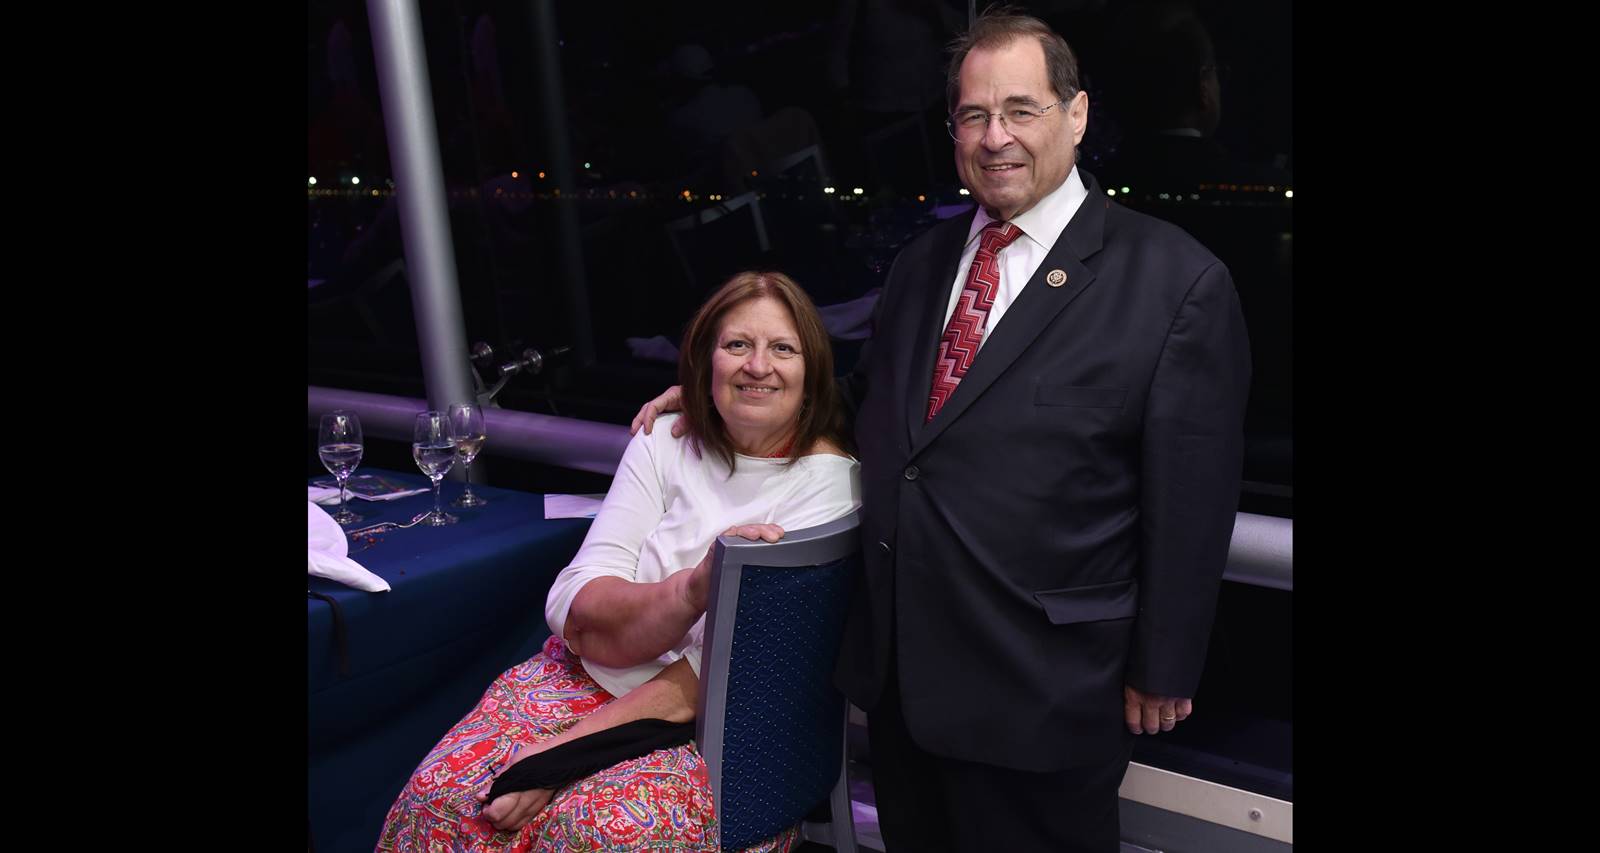 Joyce Miller Wiki, Age, Education, Career and Facts About Rep. Jerry Nadler’s Wife